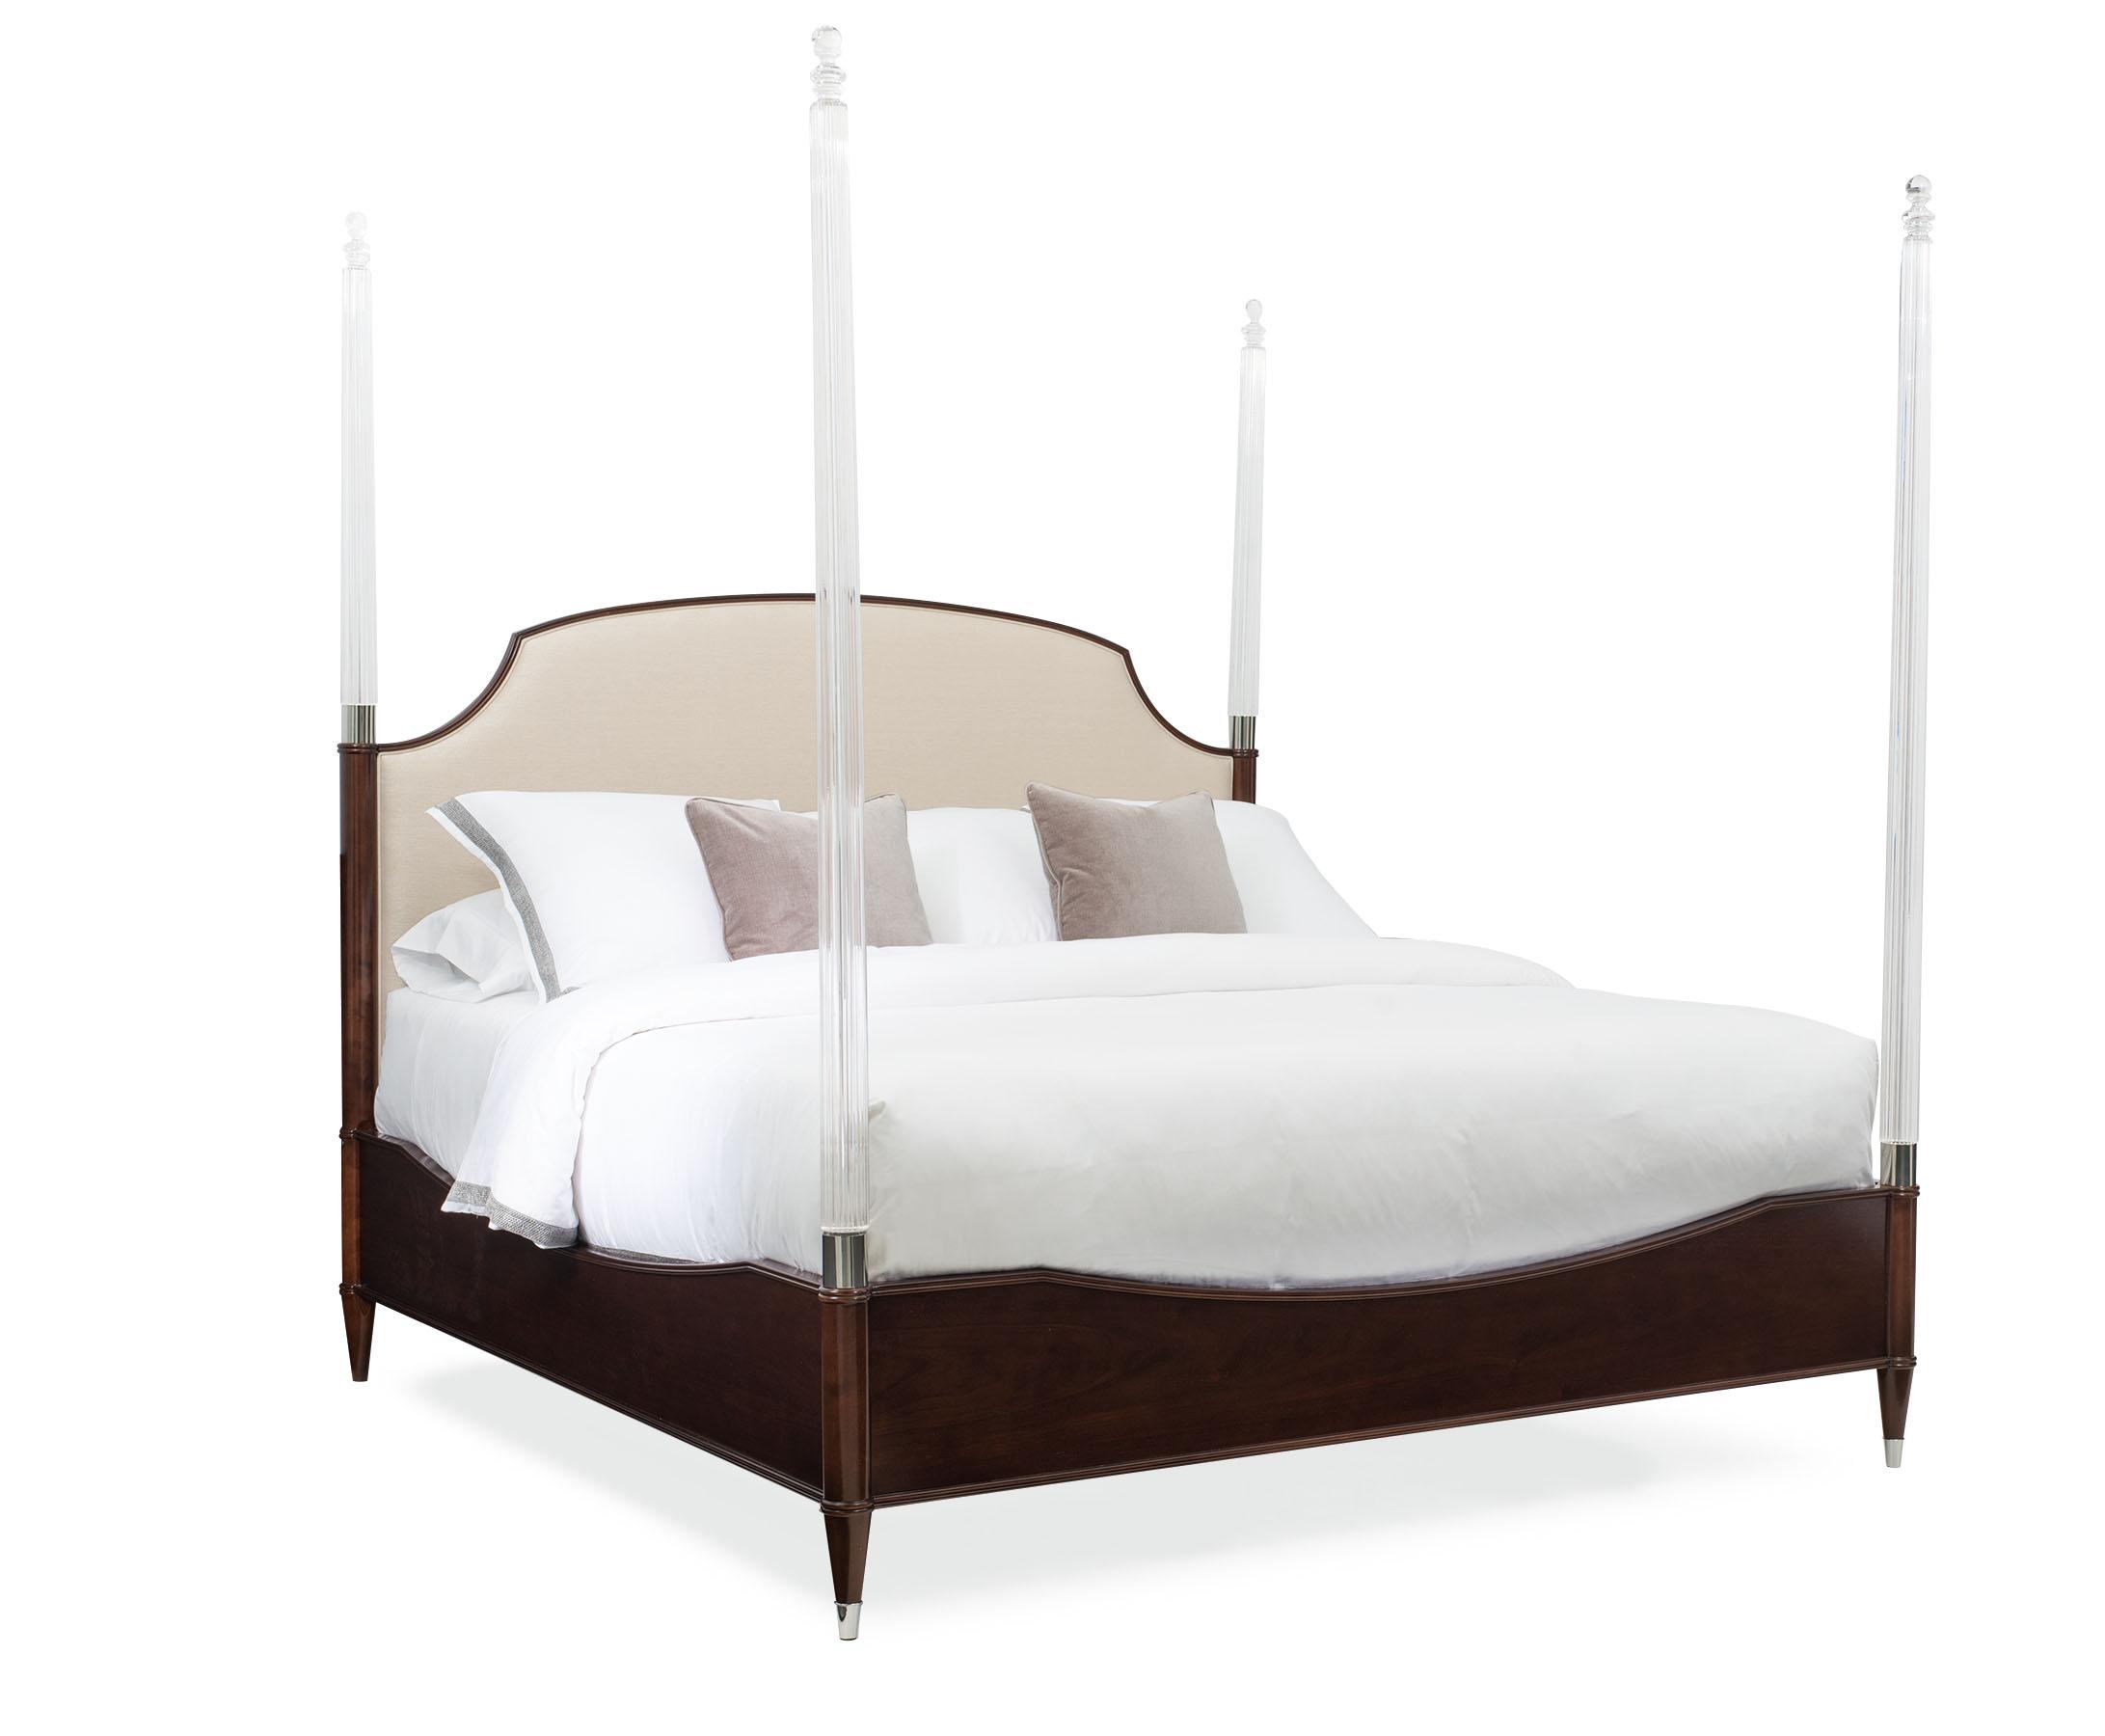 Contemporary Poster Bed Crown Jewel w/ Post CLA-420-147 in Mocha, Beige Fabric